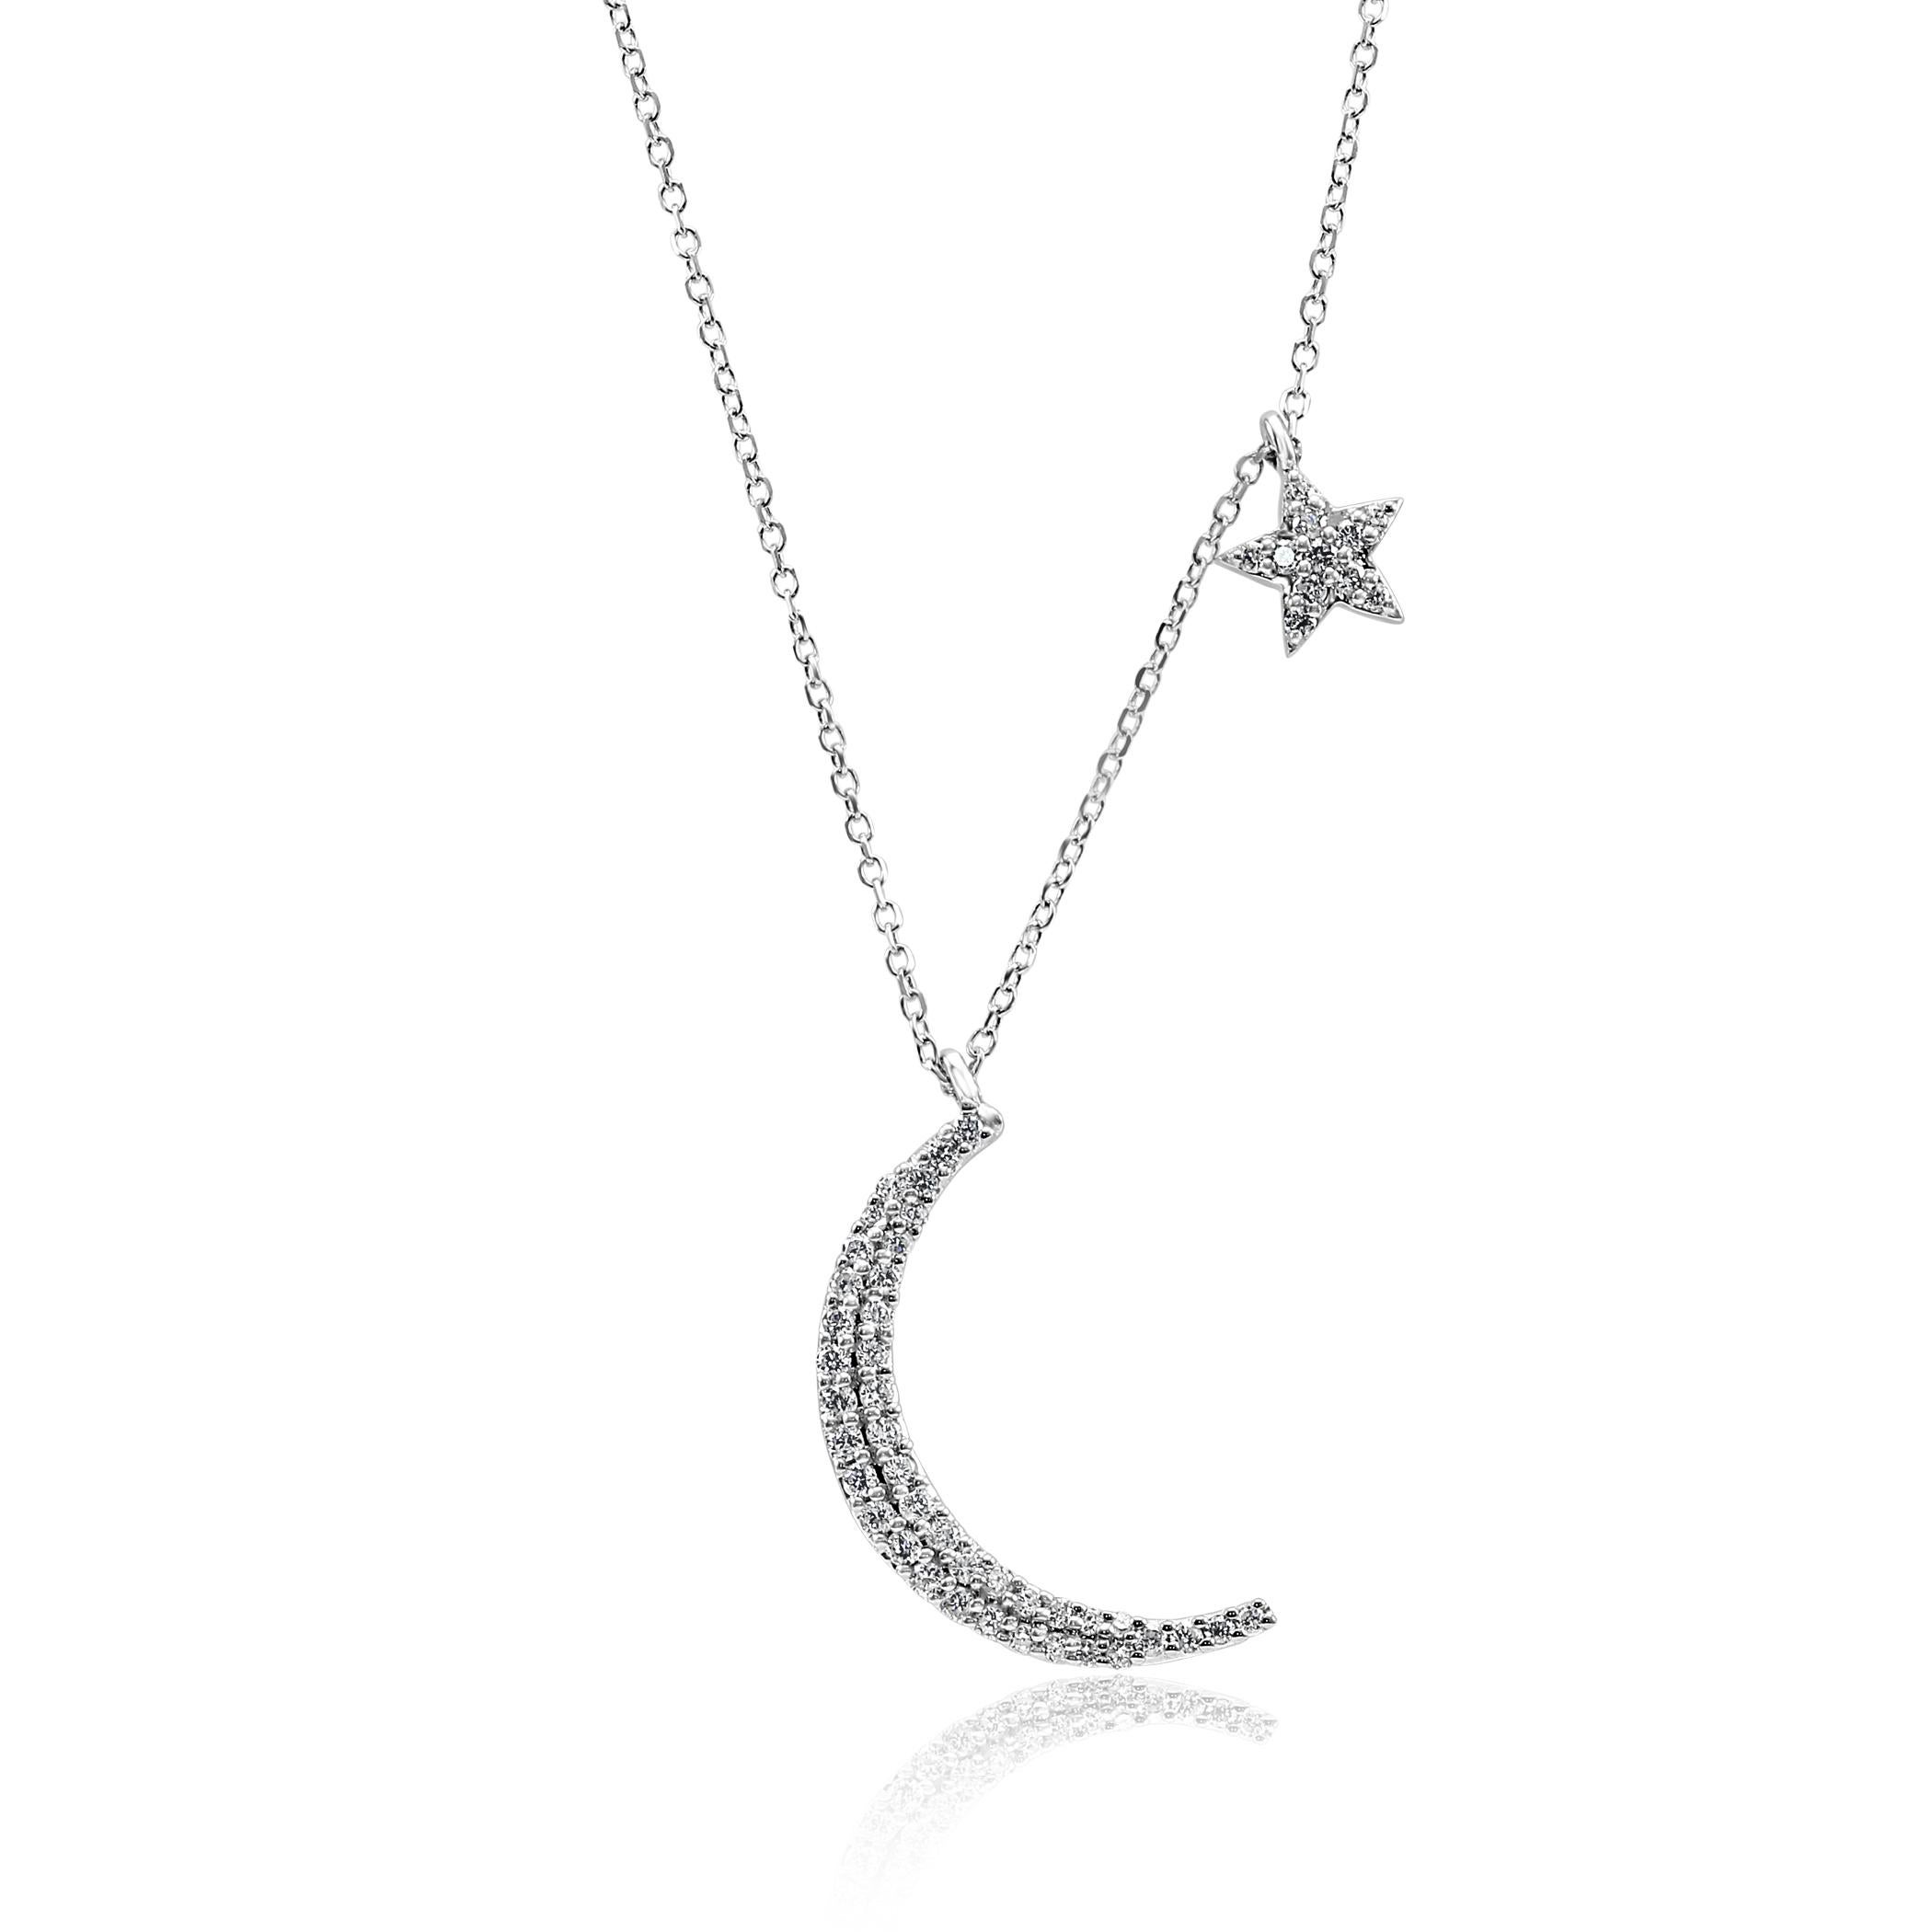 Stunning Crescent Moon and Star style 14K White Gold Pendant Necklace with 52 White G-H Color SI Clarity Round Diamonds 0.33 Carat. Beautifully styled perfect for all days .

Total Diamond Weight. 

Style available in all Gold Colors and different